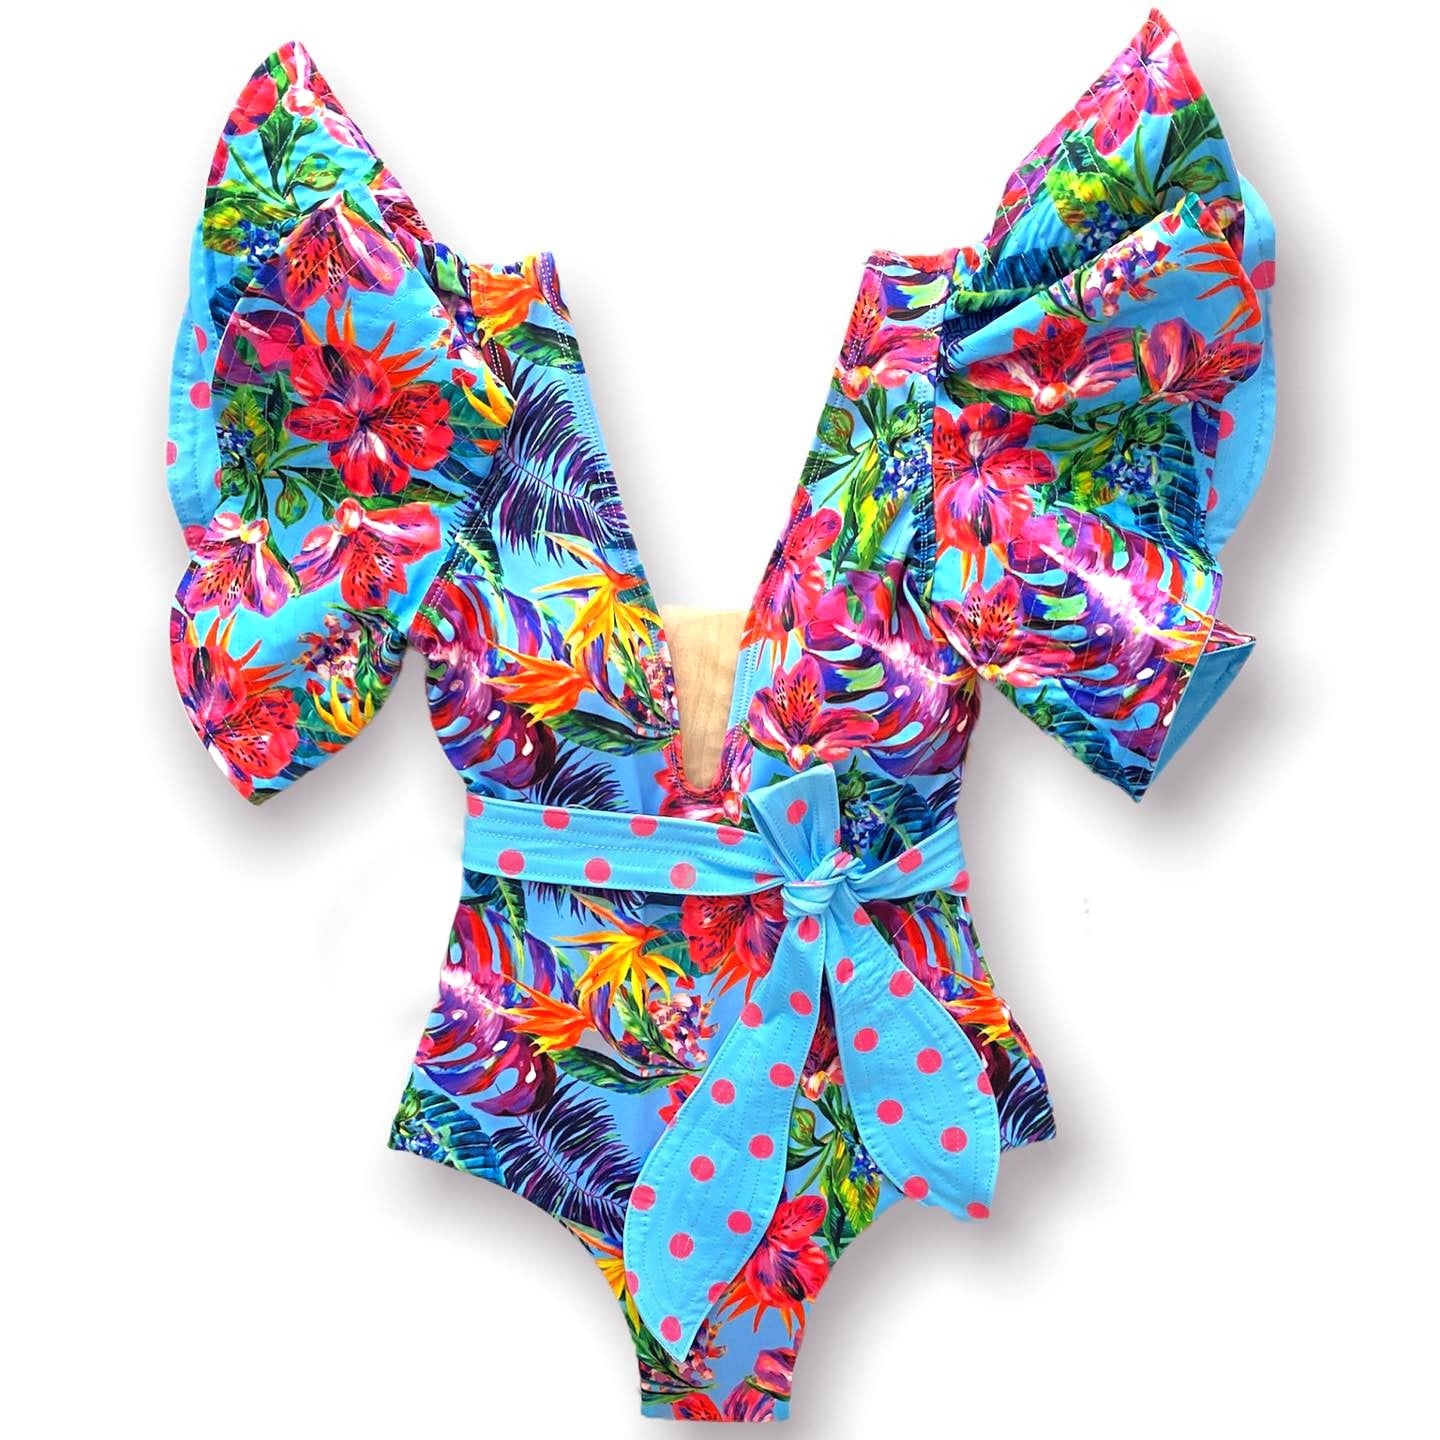 Floral Printed Deep V-neck Ruffle Swimsuit Push Up One Piece Backless Monokini